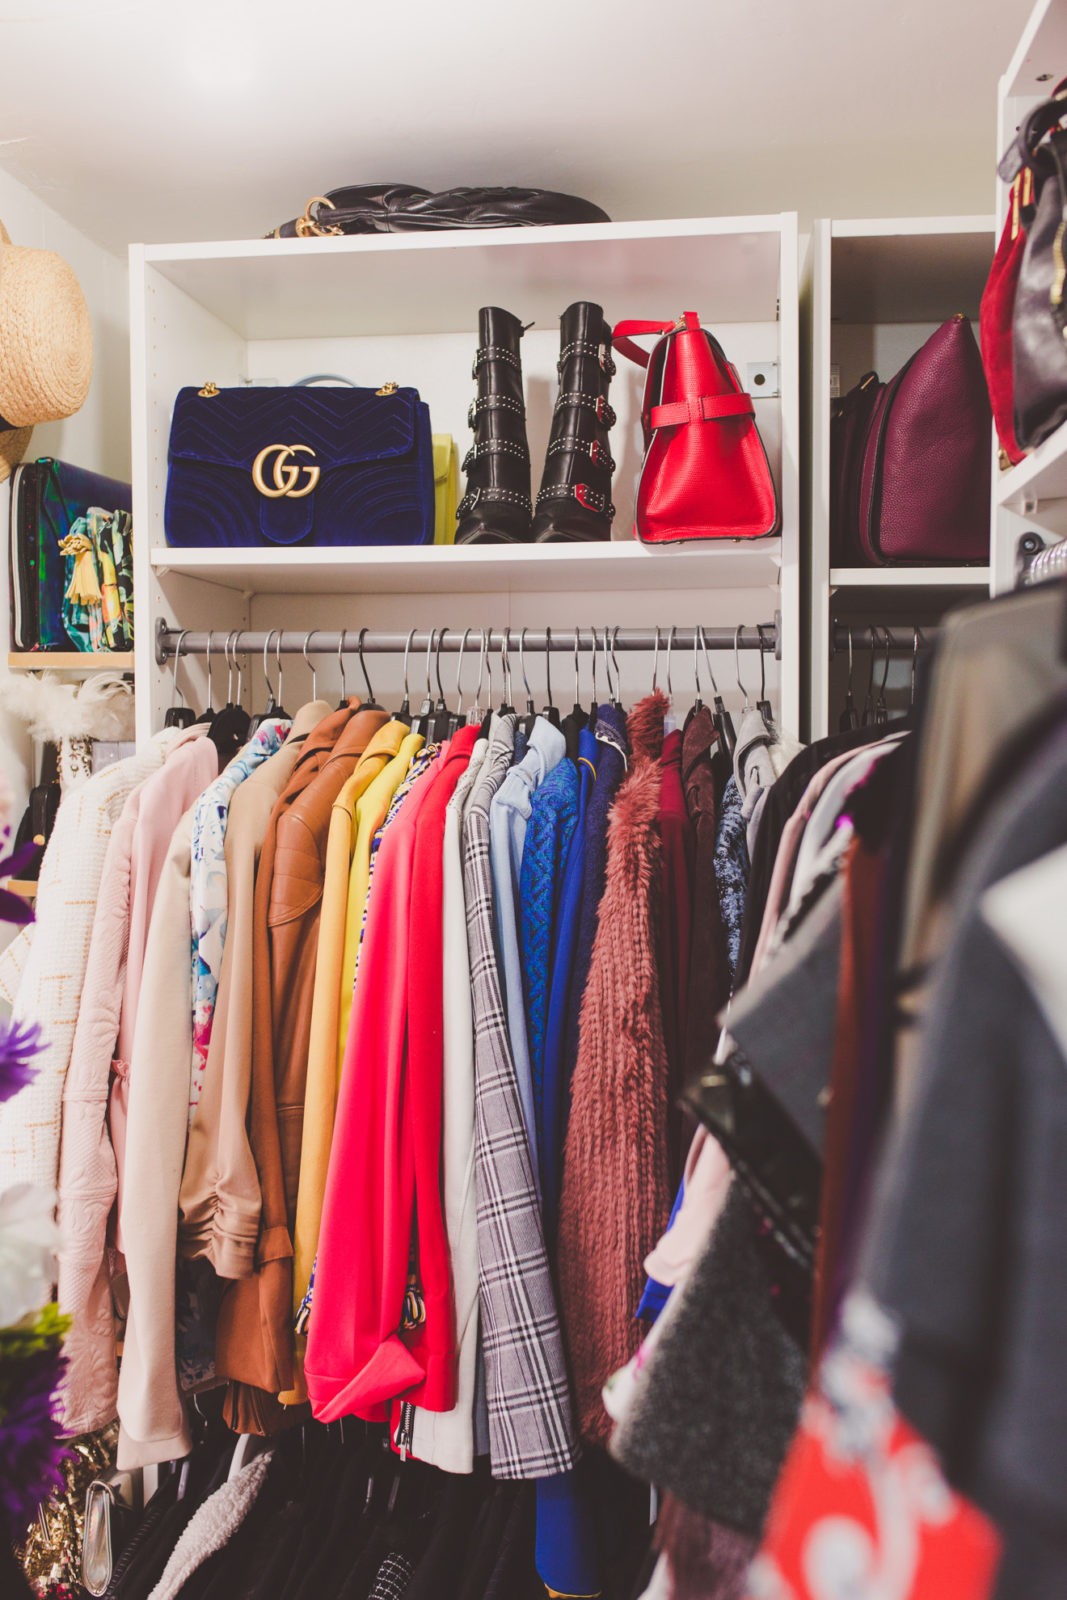 Quick Tips for Tidying Up Your Home,closet organization by Los Angeles Lifestyle Blogger Laura Lily | Tips on Tidying Up Your Home and Shopping Less by popular Los Angeles life and style blogger, Laura Lily: image of a organized bedroom closet.